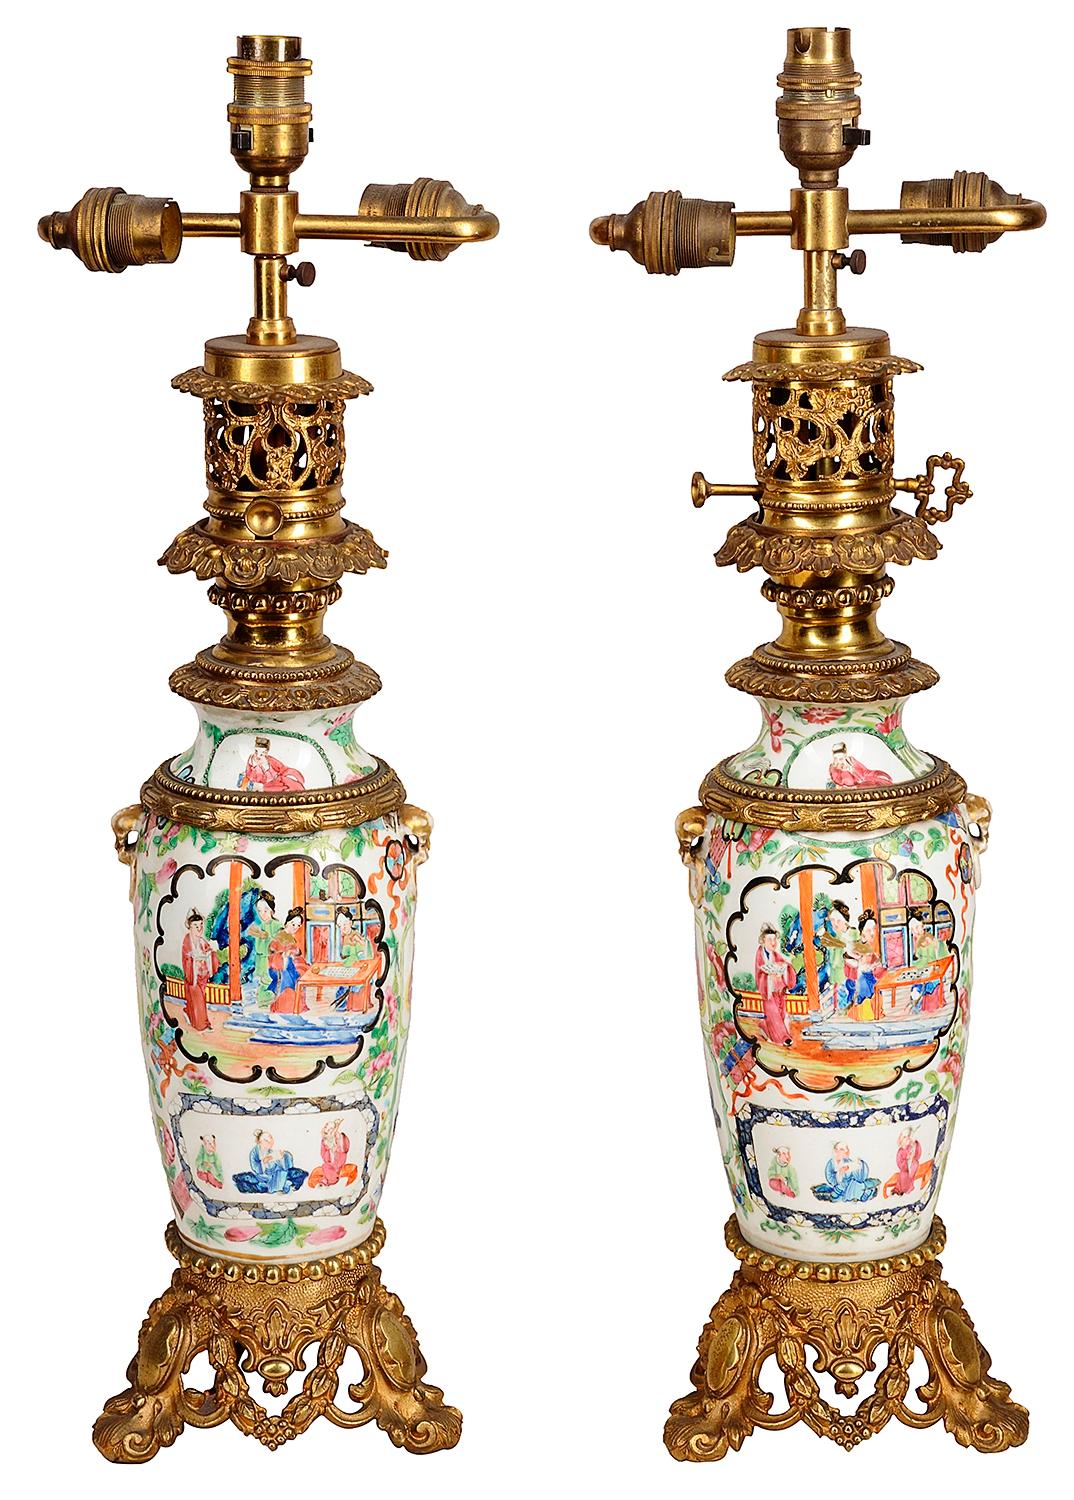 A pair of 19th century Chinese Cantonese / rose medallion vases / lamps. Each with wonderful green ground decoration with inset hand painted panels depicting classical scenes with Geisha girls, courtiers and children, gilded ormolu mounts and bases.